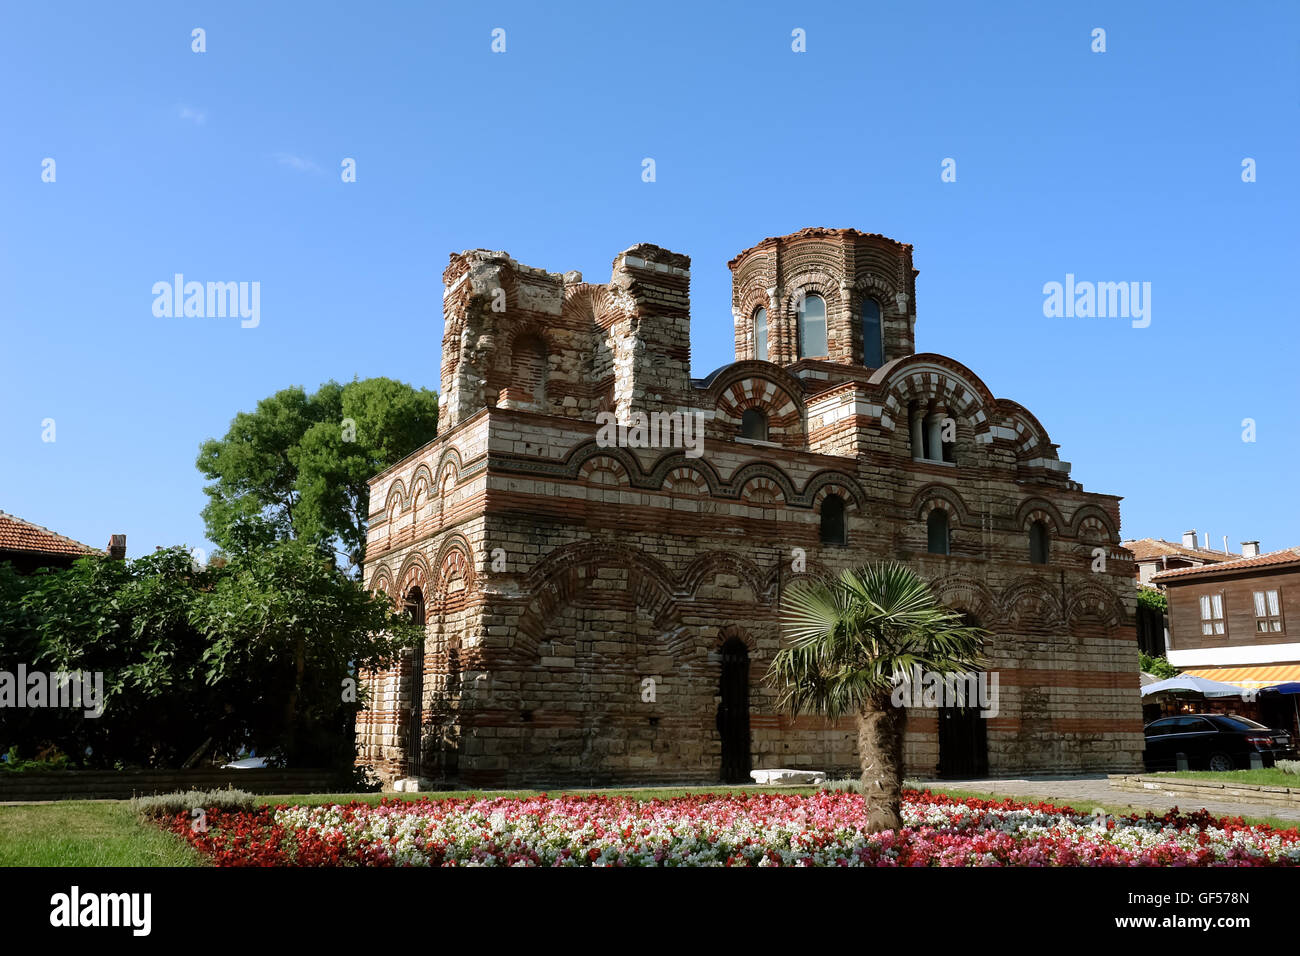 NESSEBAR, BULGARIA - JUNE 15, 2011: Church of Christ Pantocrator on the central square in the old Nessebar town, Bulgaria Stock Photo